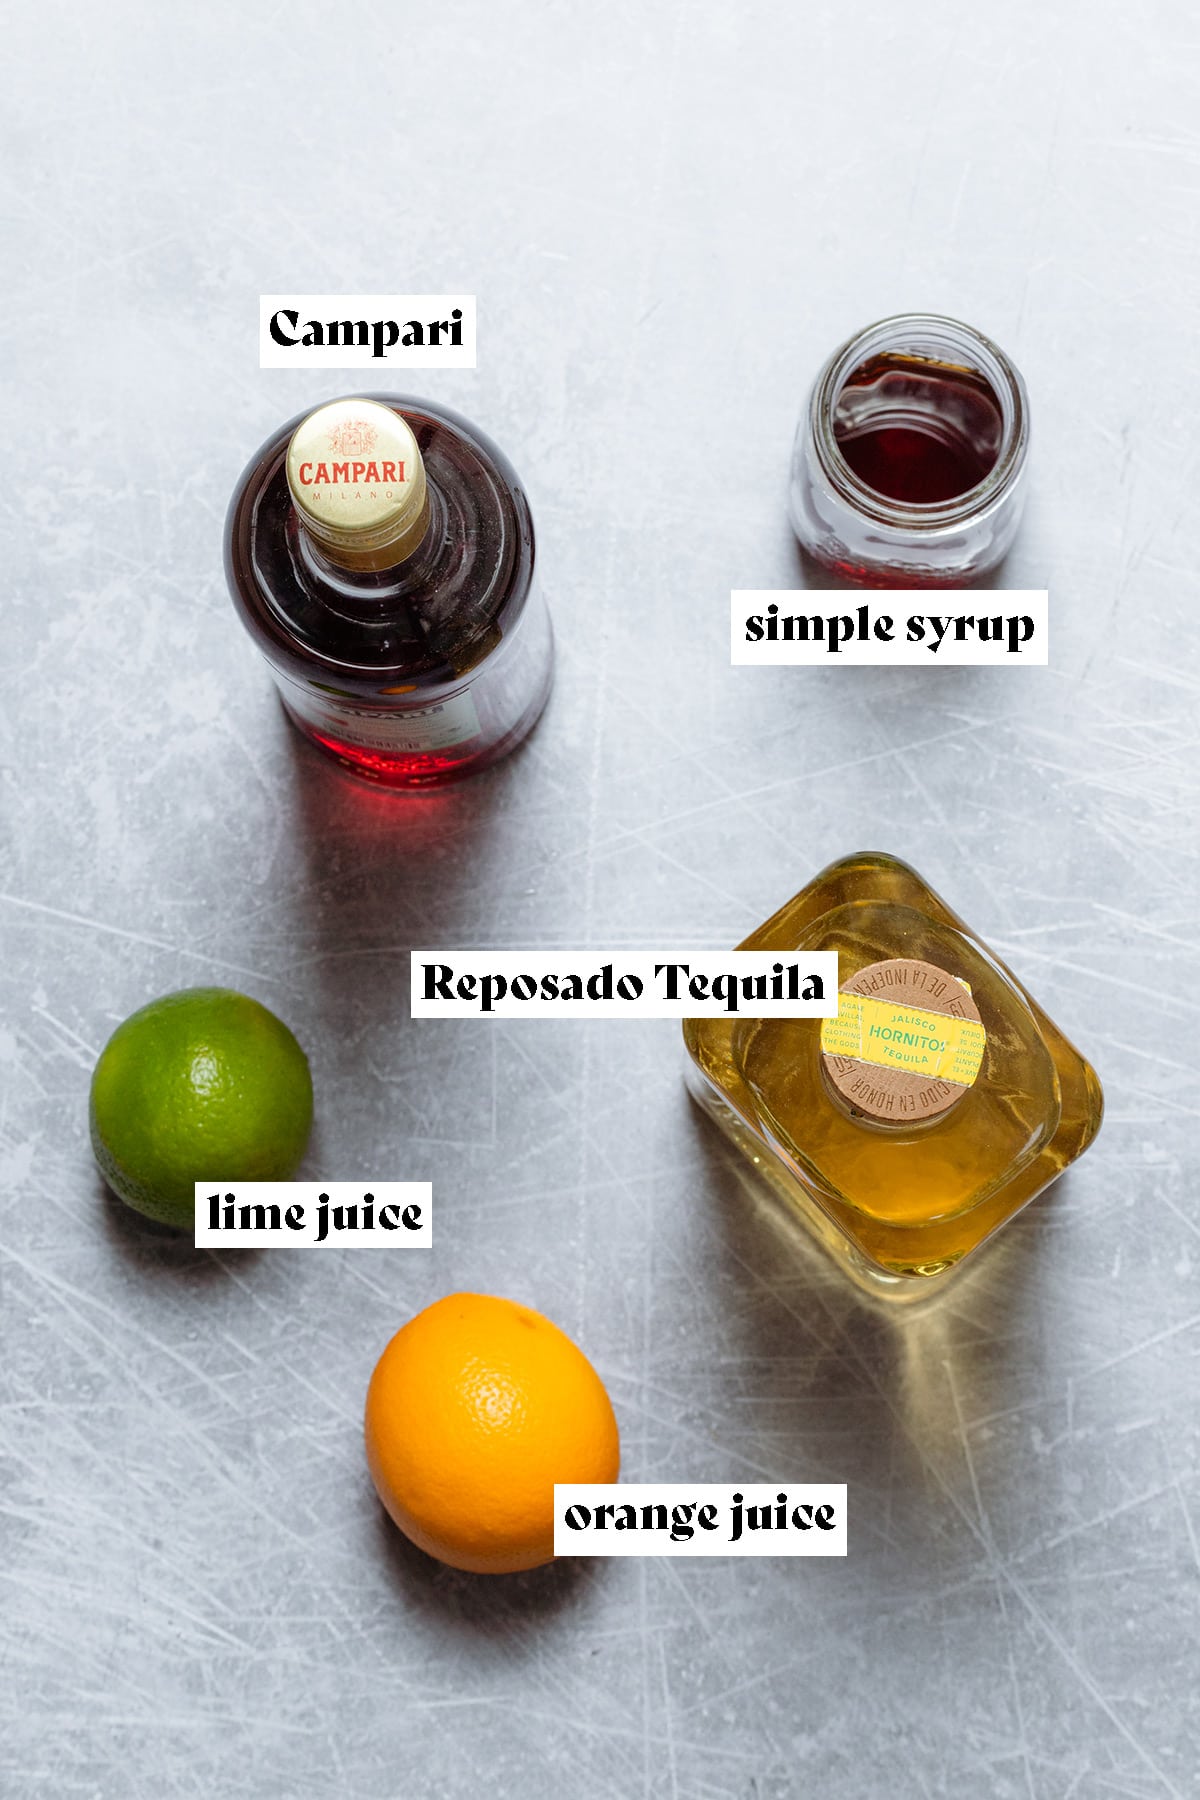 Ingredients for a Campari margarita like tequila and Campari laid out on a metal background.